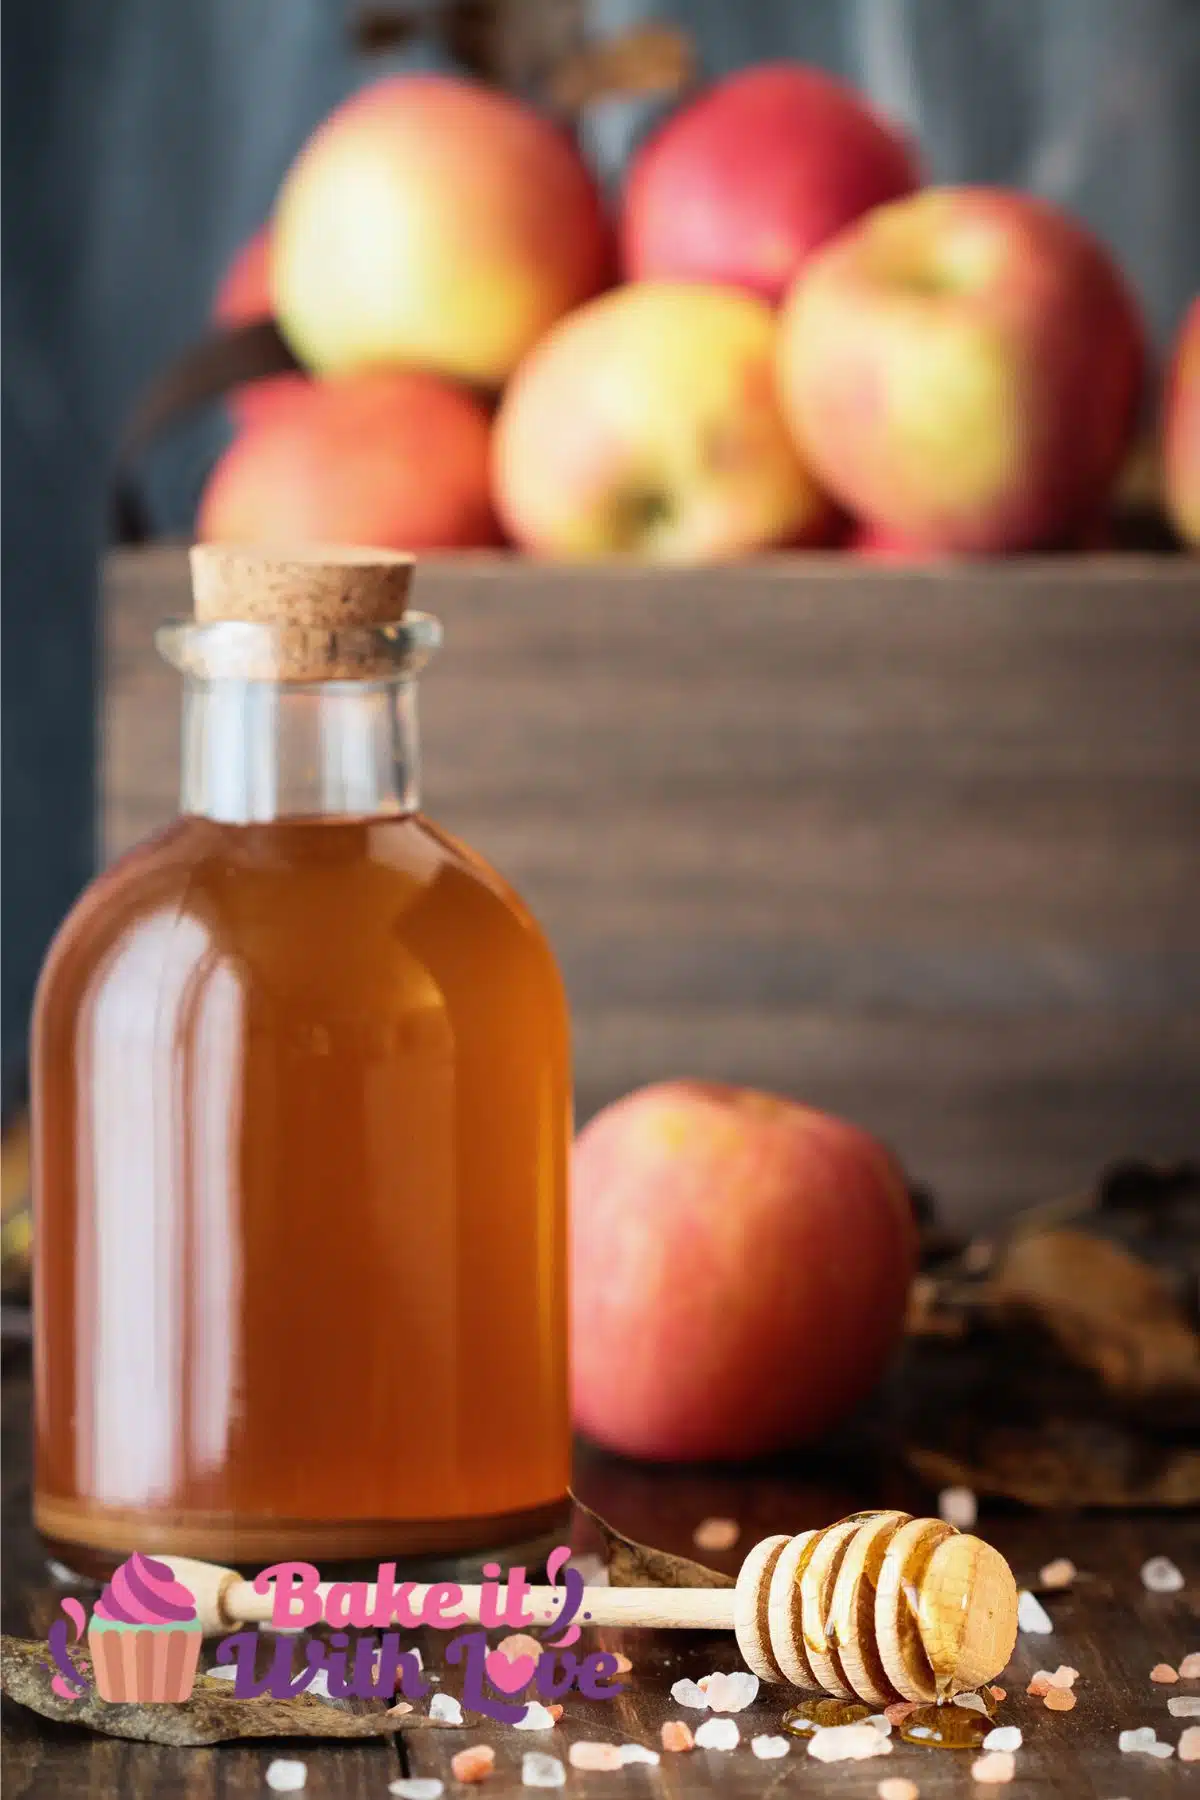 Best apple cider substitute and alternatives to use in cooking and baking recipes like this bottled apple cider with honey.